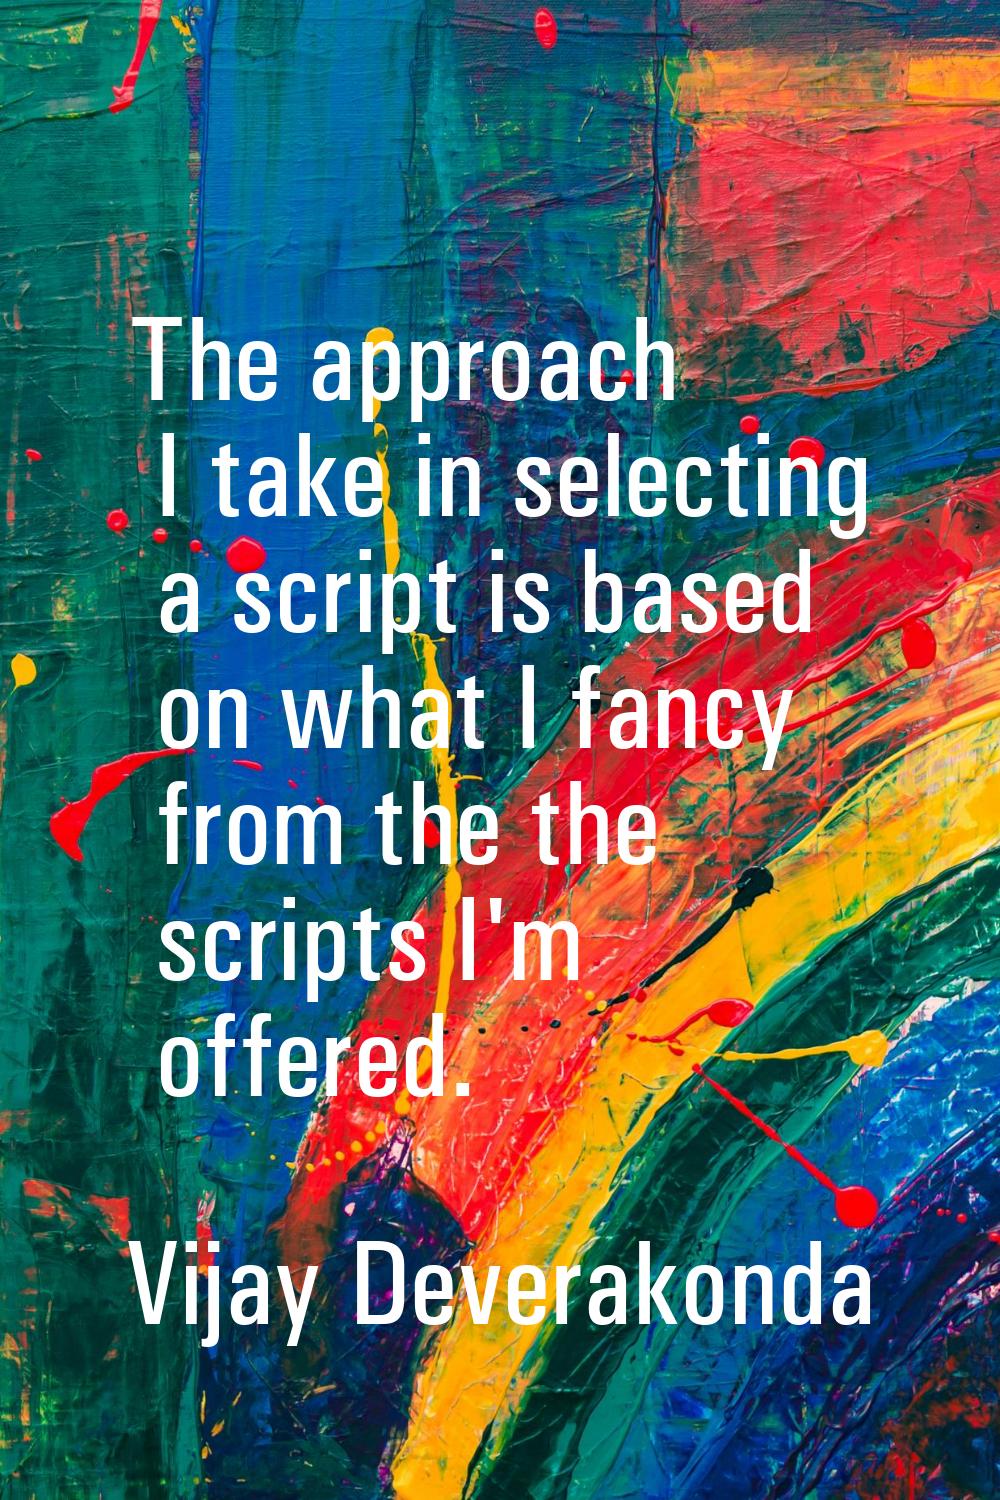 The approach I take in selecting a script is based on what I fancy from the the scripts I'm offered